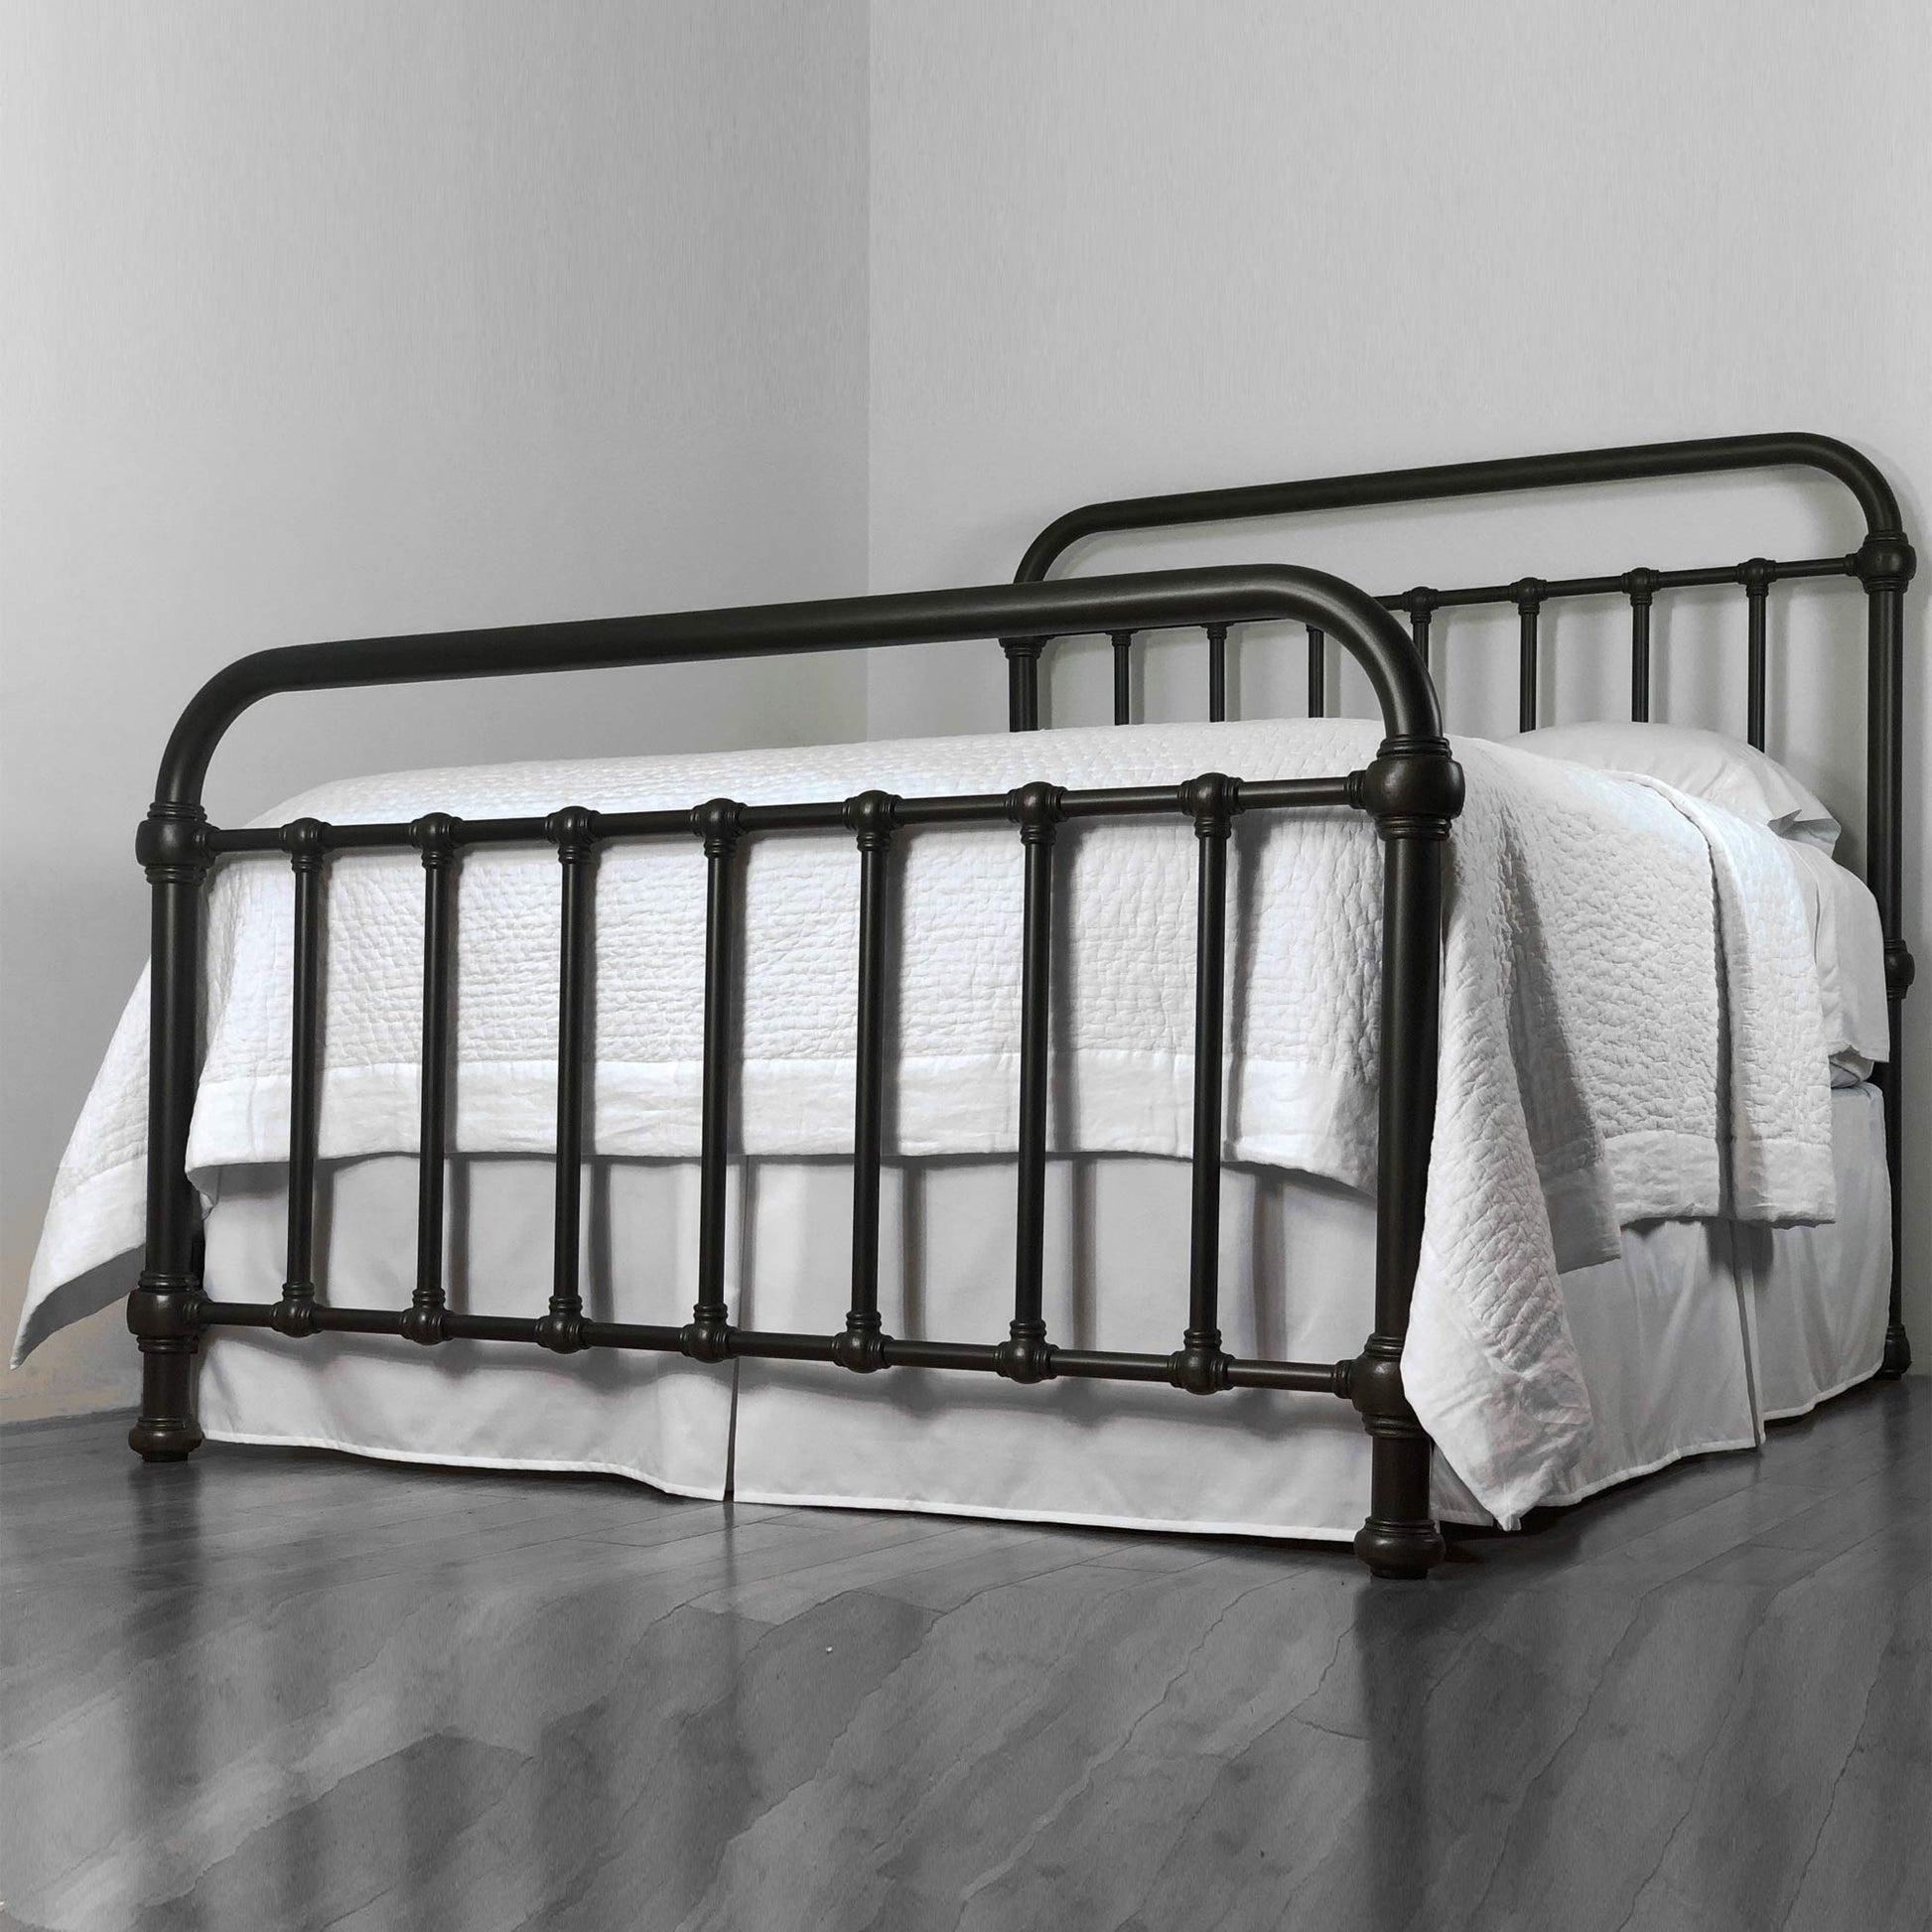 Heiressy's orignal 20th c Americana Iron bed is a timeless class with a traditional of high-end designer quality wrought iron beds.